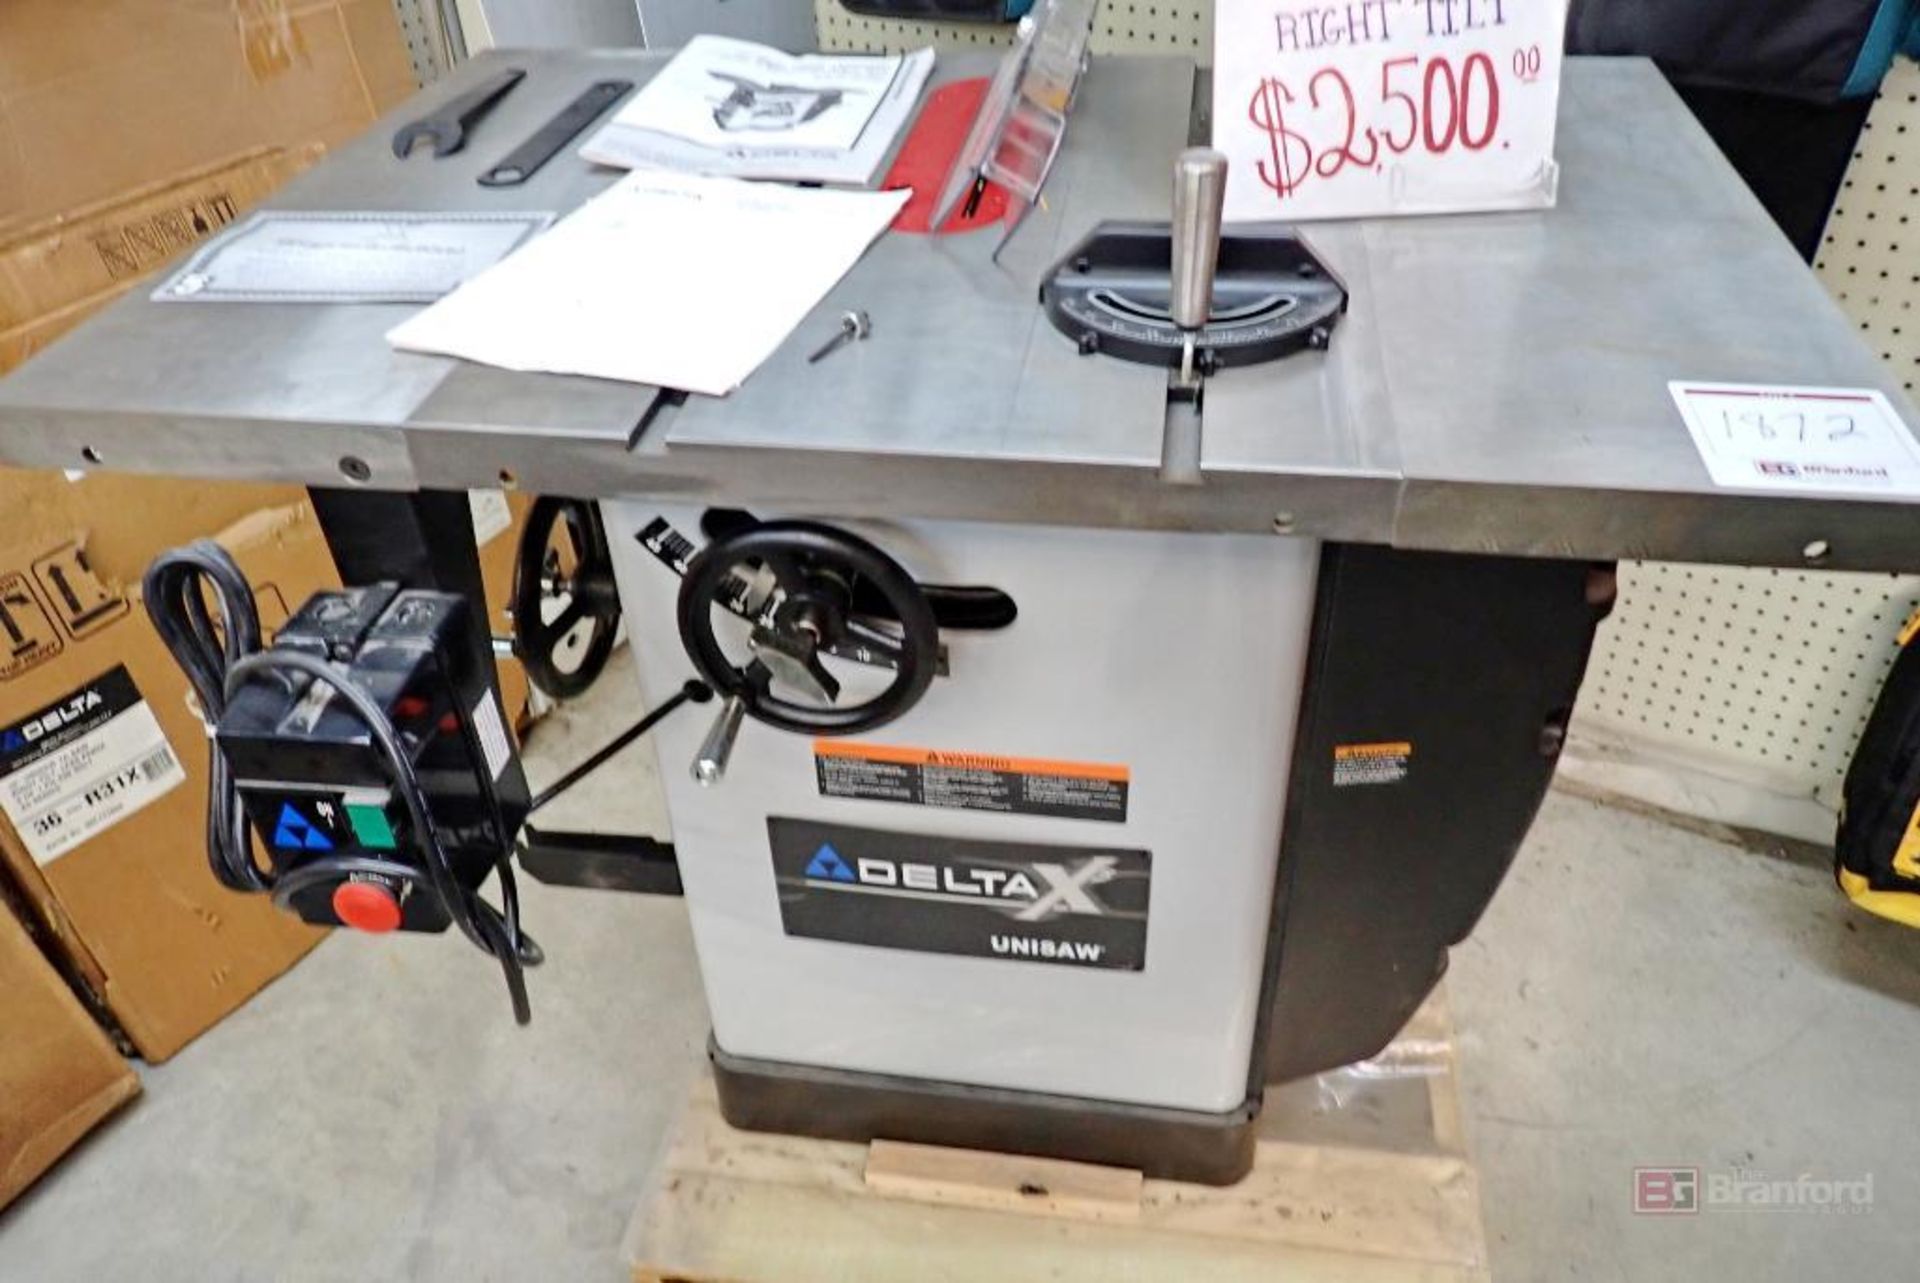 Delta X5 36-R31X Unisaw 10" Right Tilting Table Saw